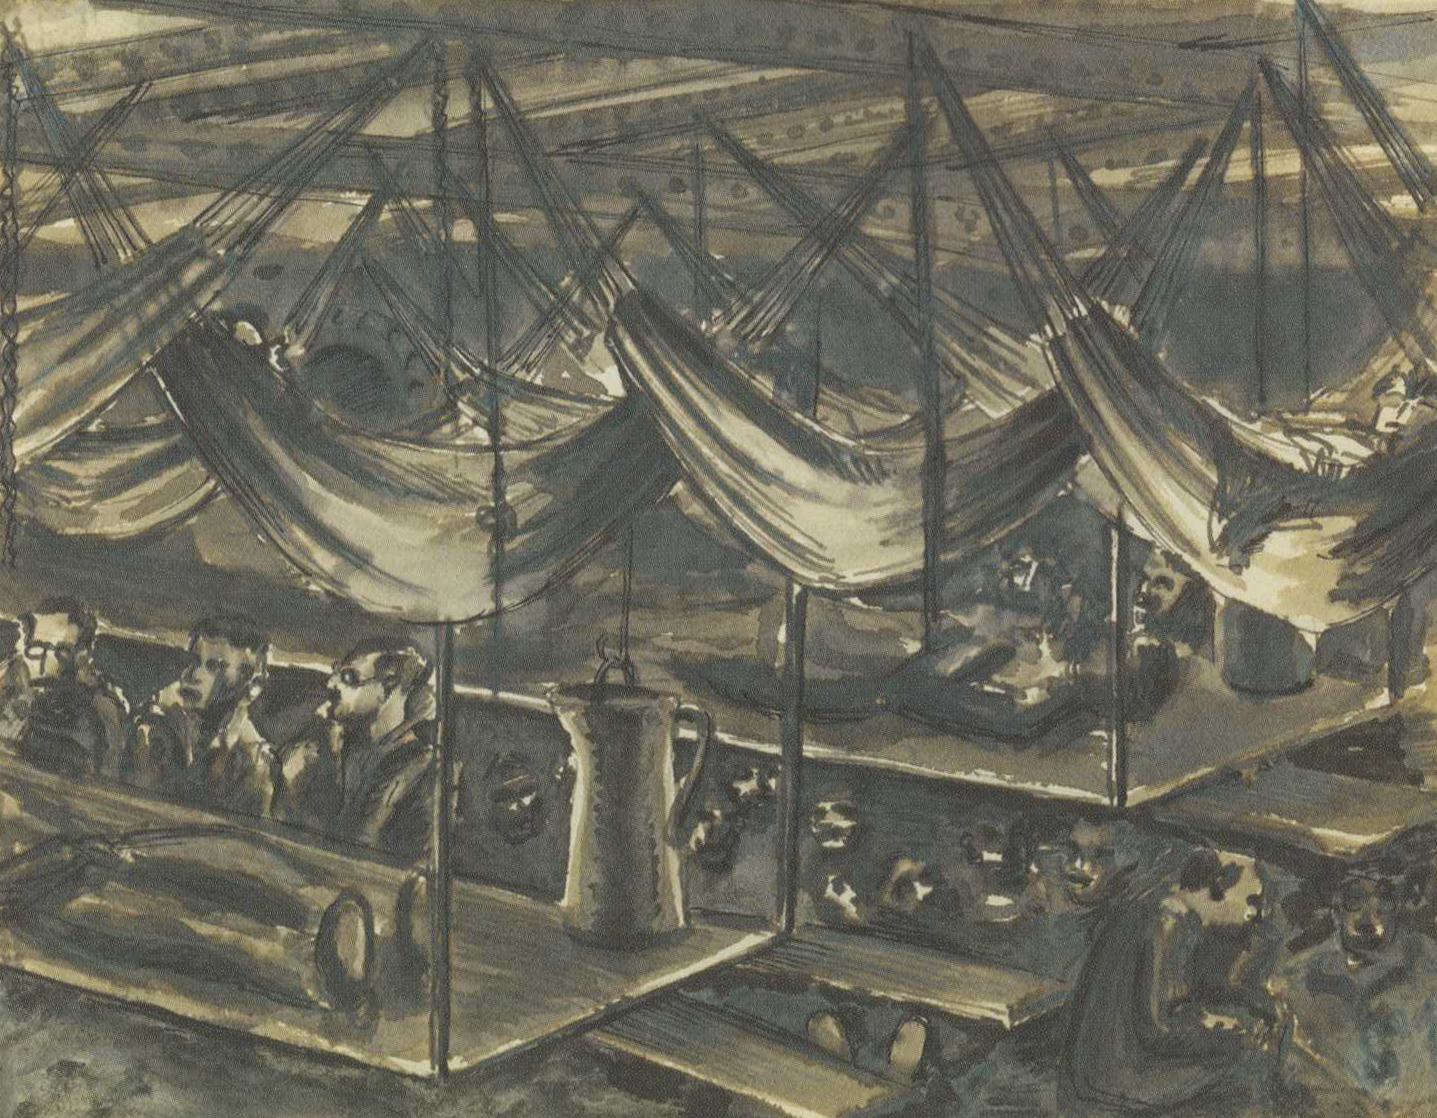 An artwork by Emil Wittenberg documenting the crowding living quarters on the Dunera. (Source and copyright: Martin Burman)